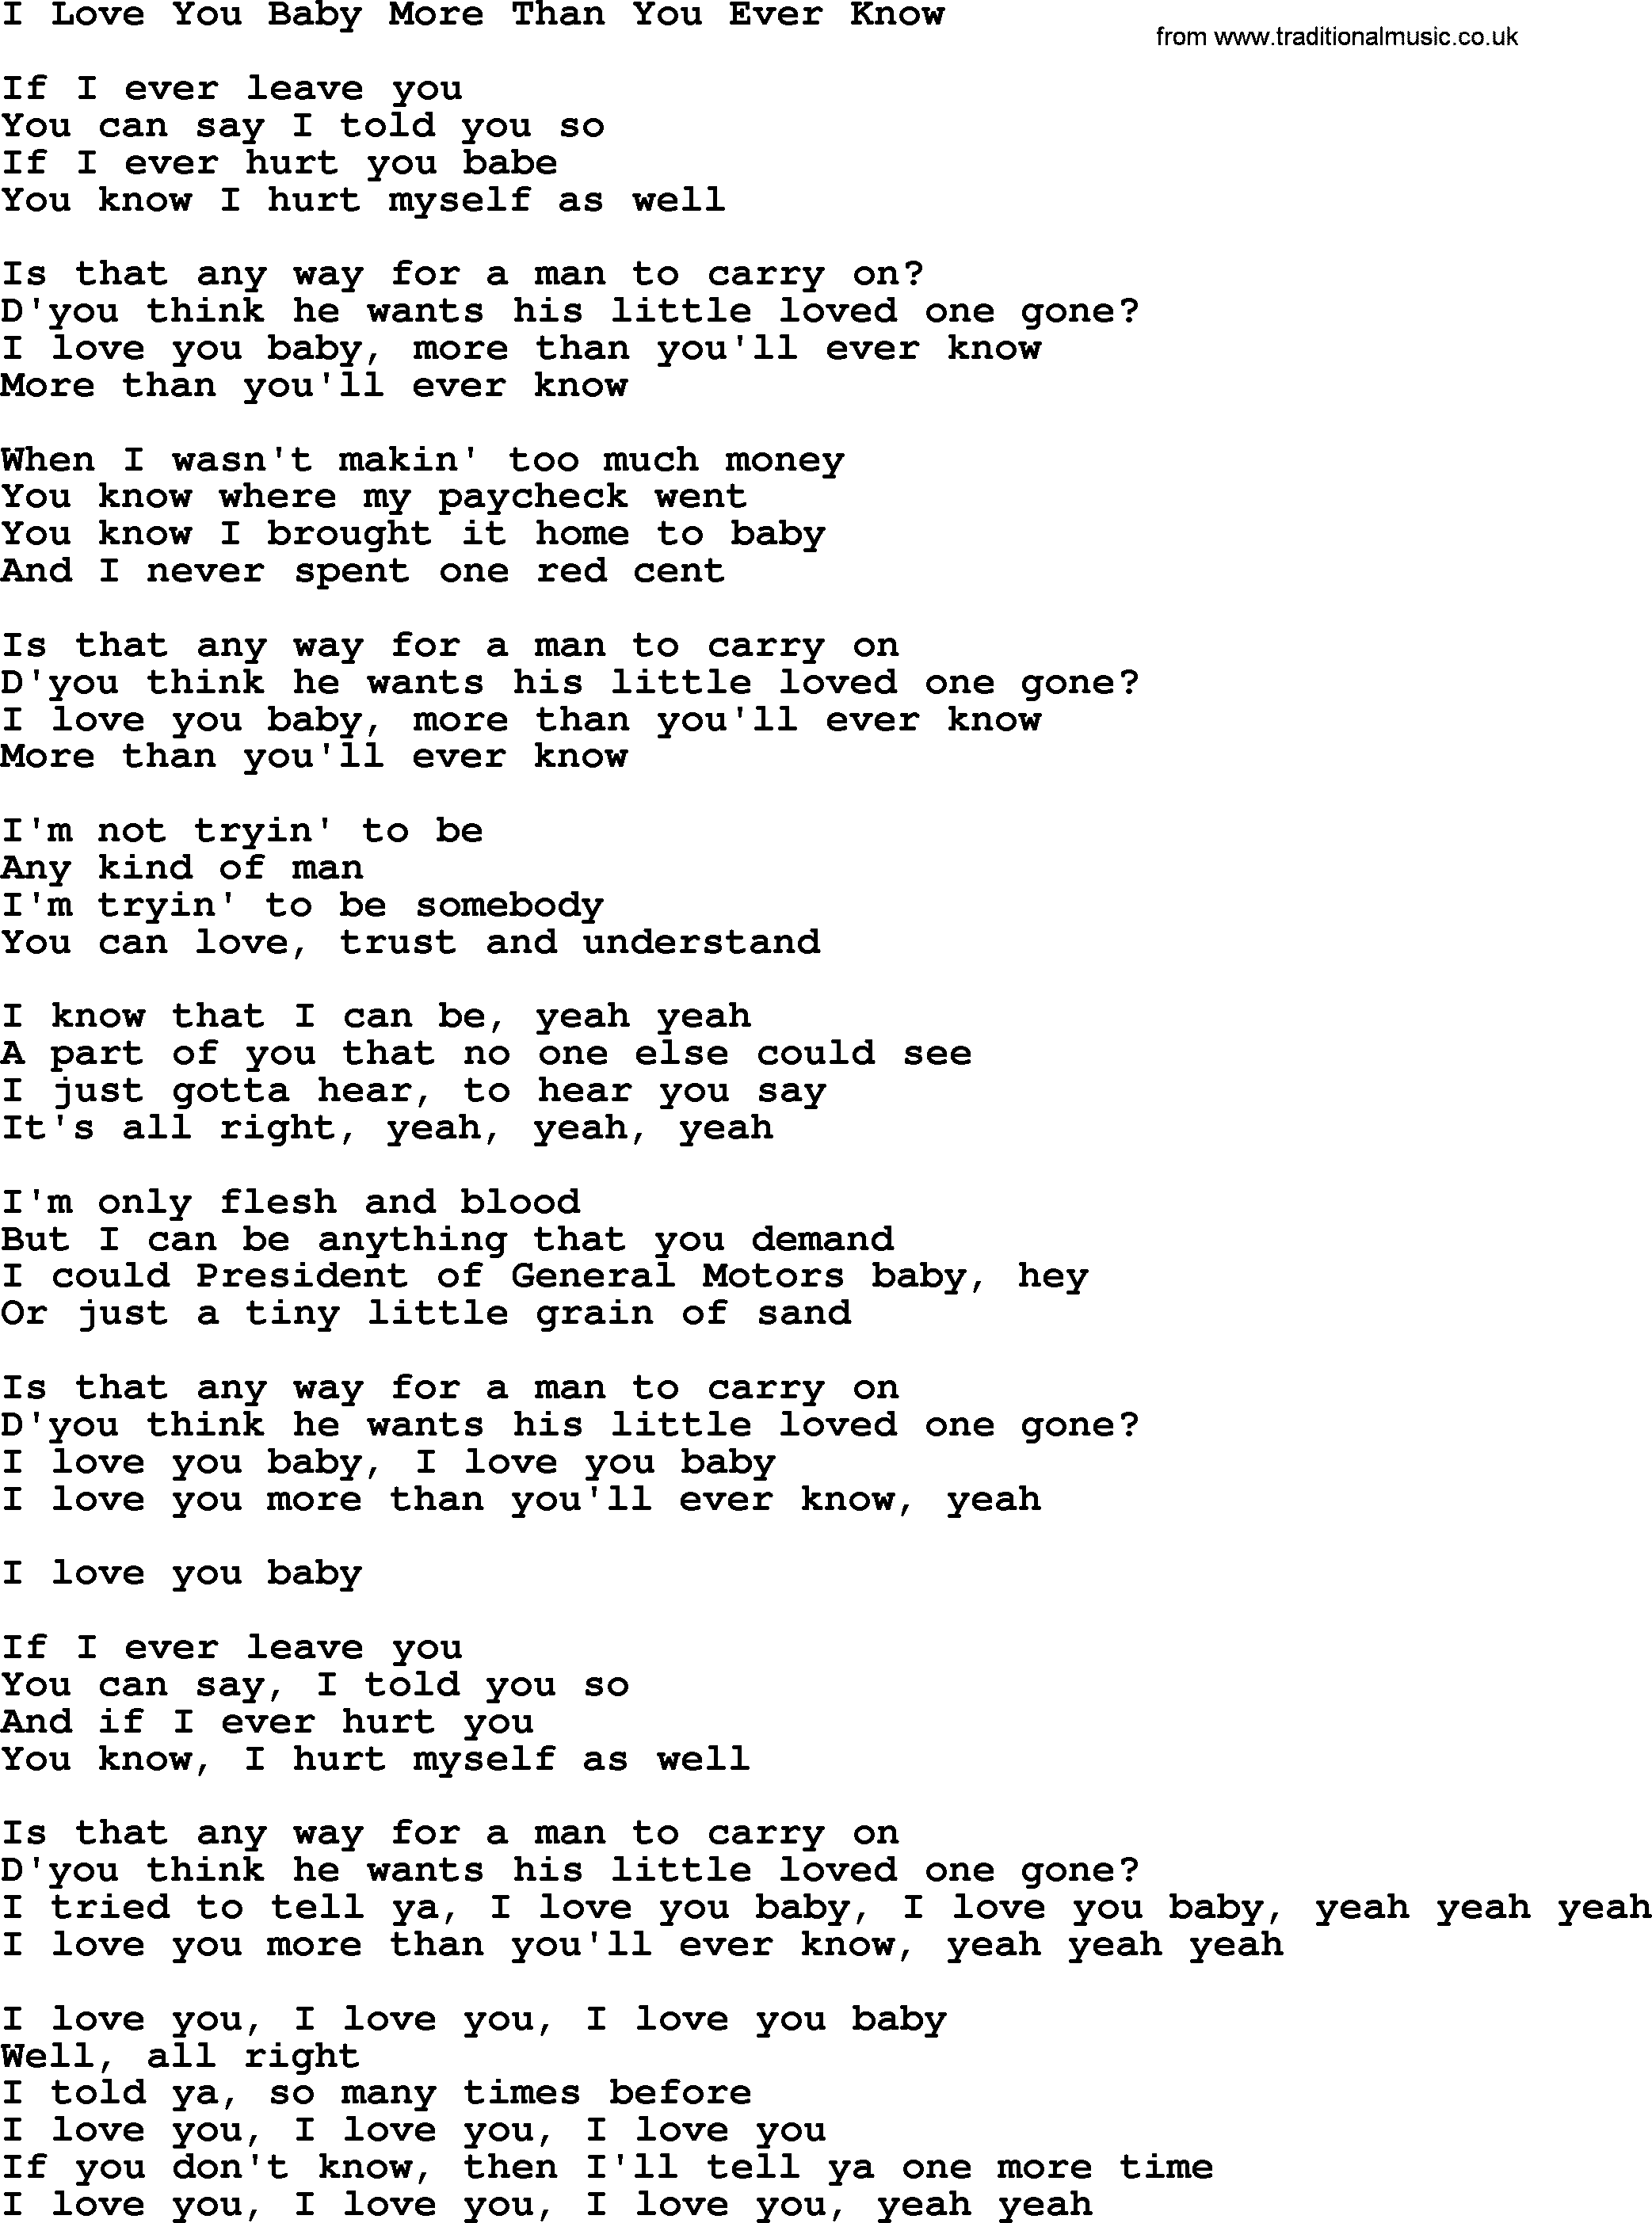 I Love You Baby More Than You Ever Know, by The Byrds - lyrics with pdf